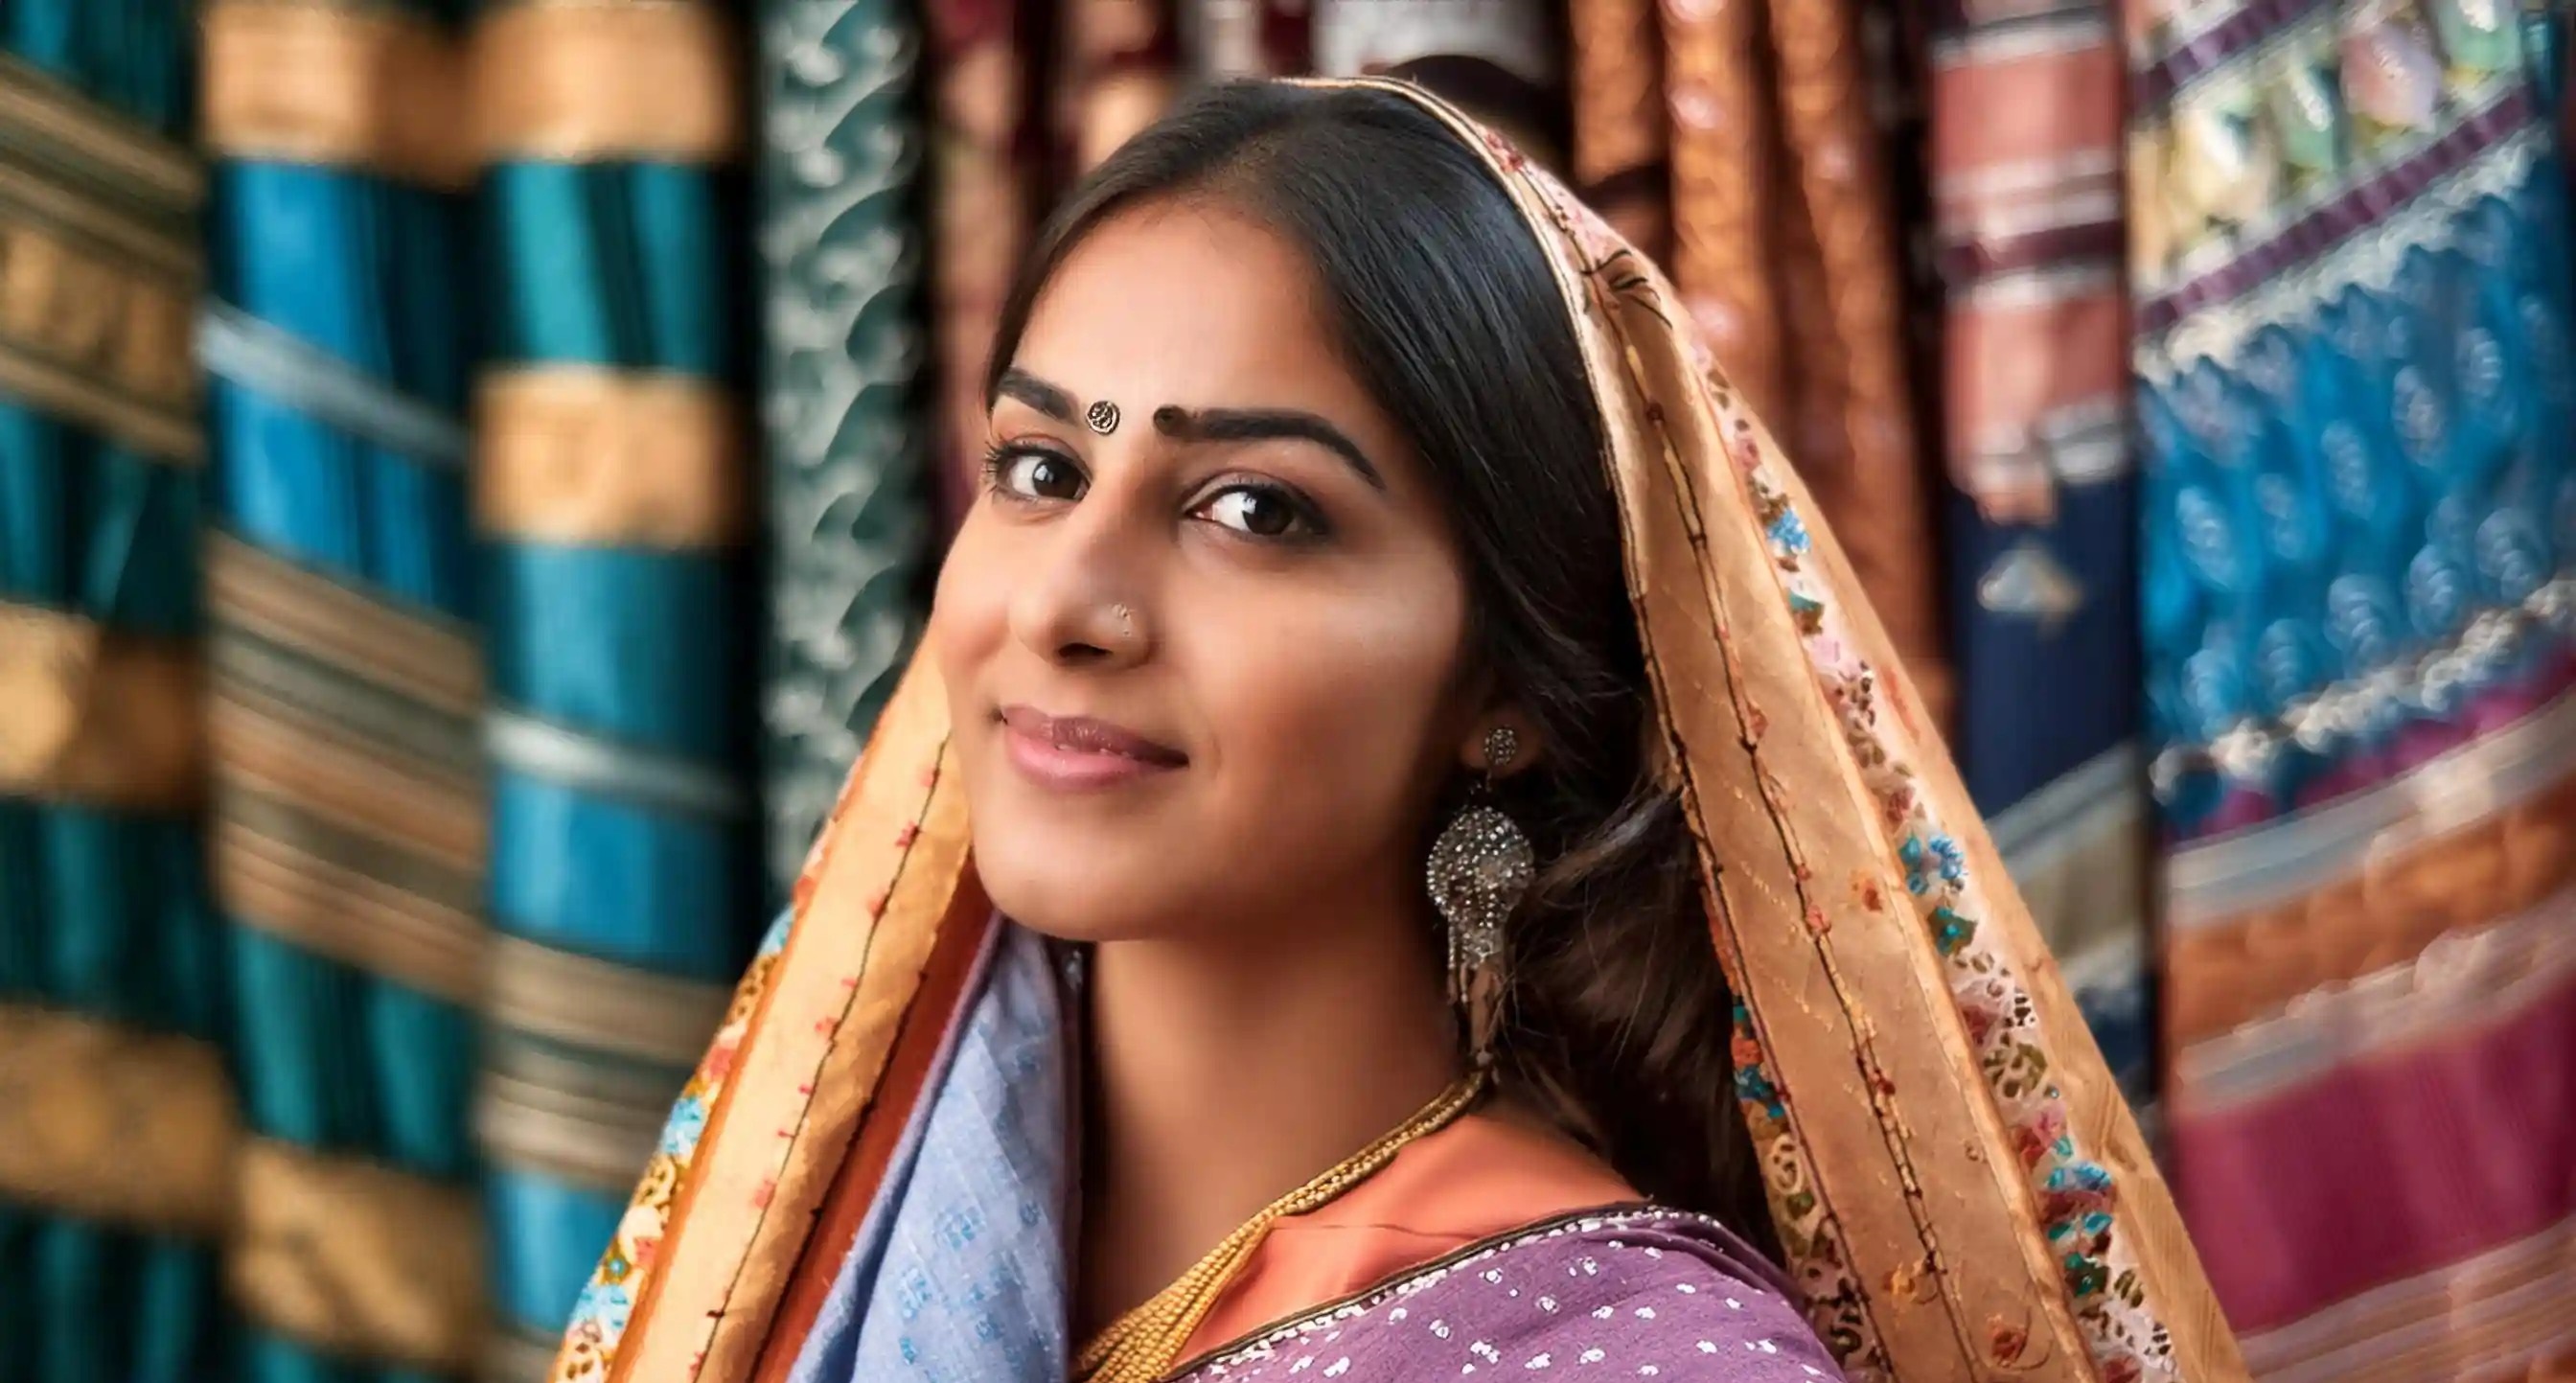 [A young woman in a traditional saree stands before colorful fabrics. She wears a nose stud, ornate earrings, and smiles serenely, highlighting the intricate designs and cultural richness of her attire]-[fabricpitara]